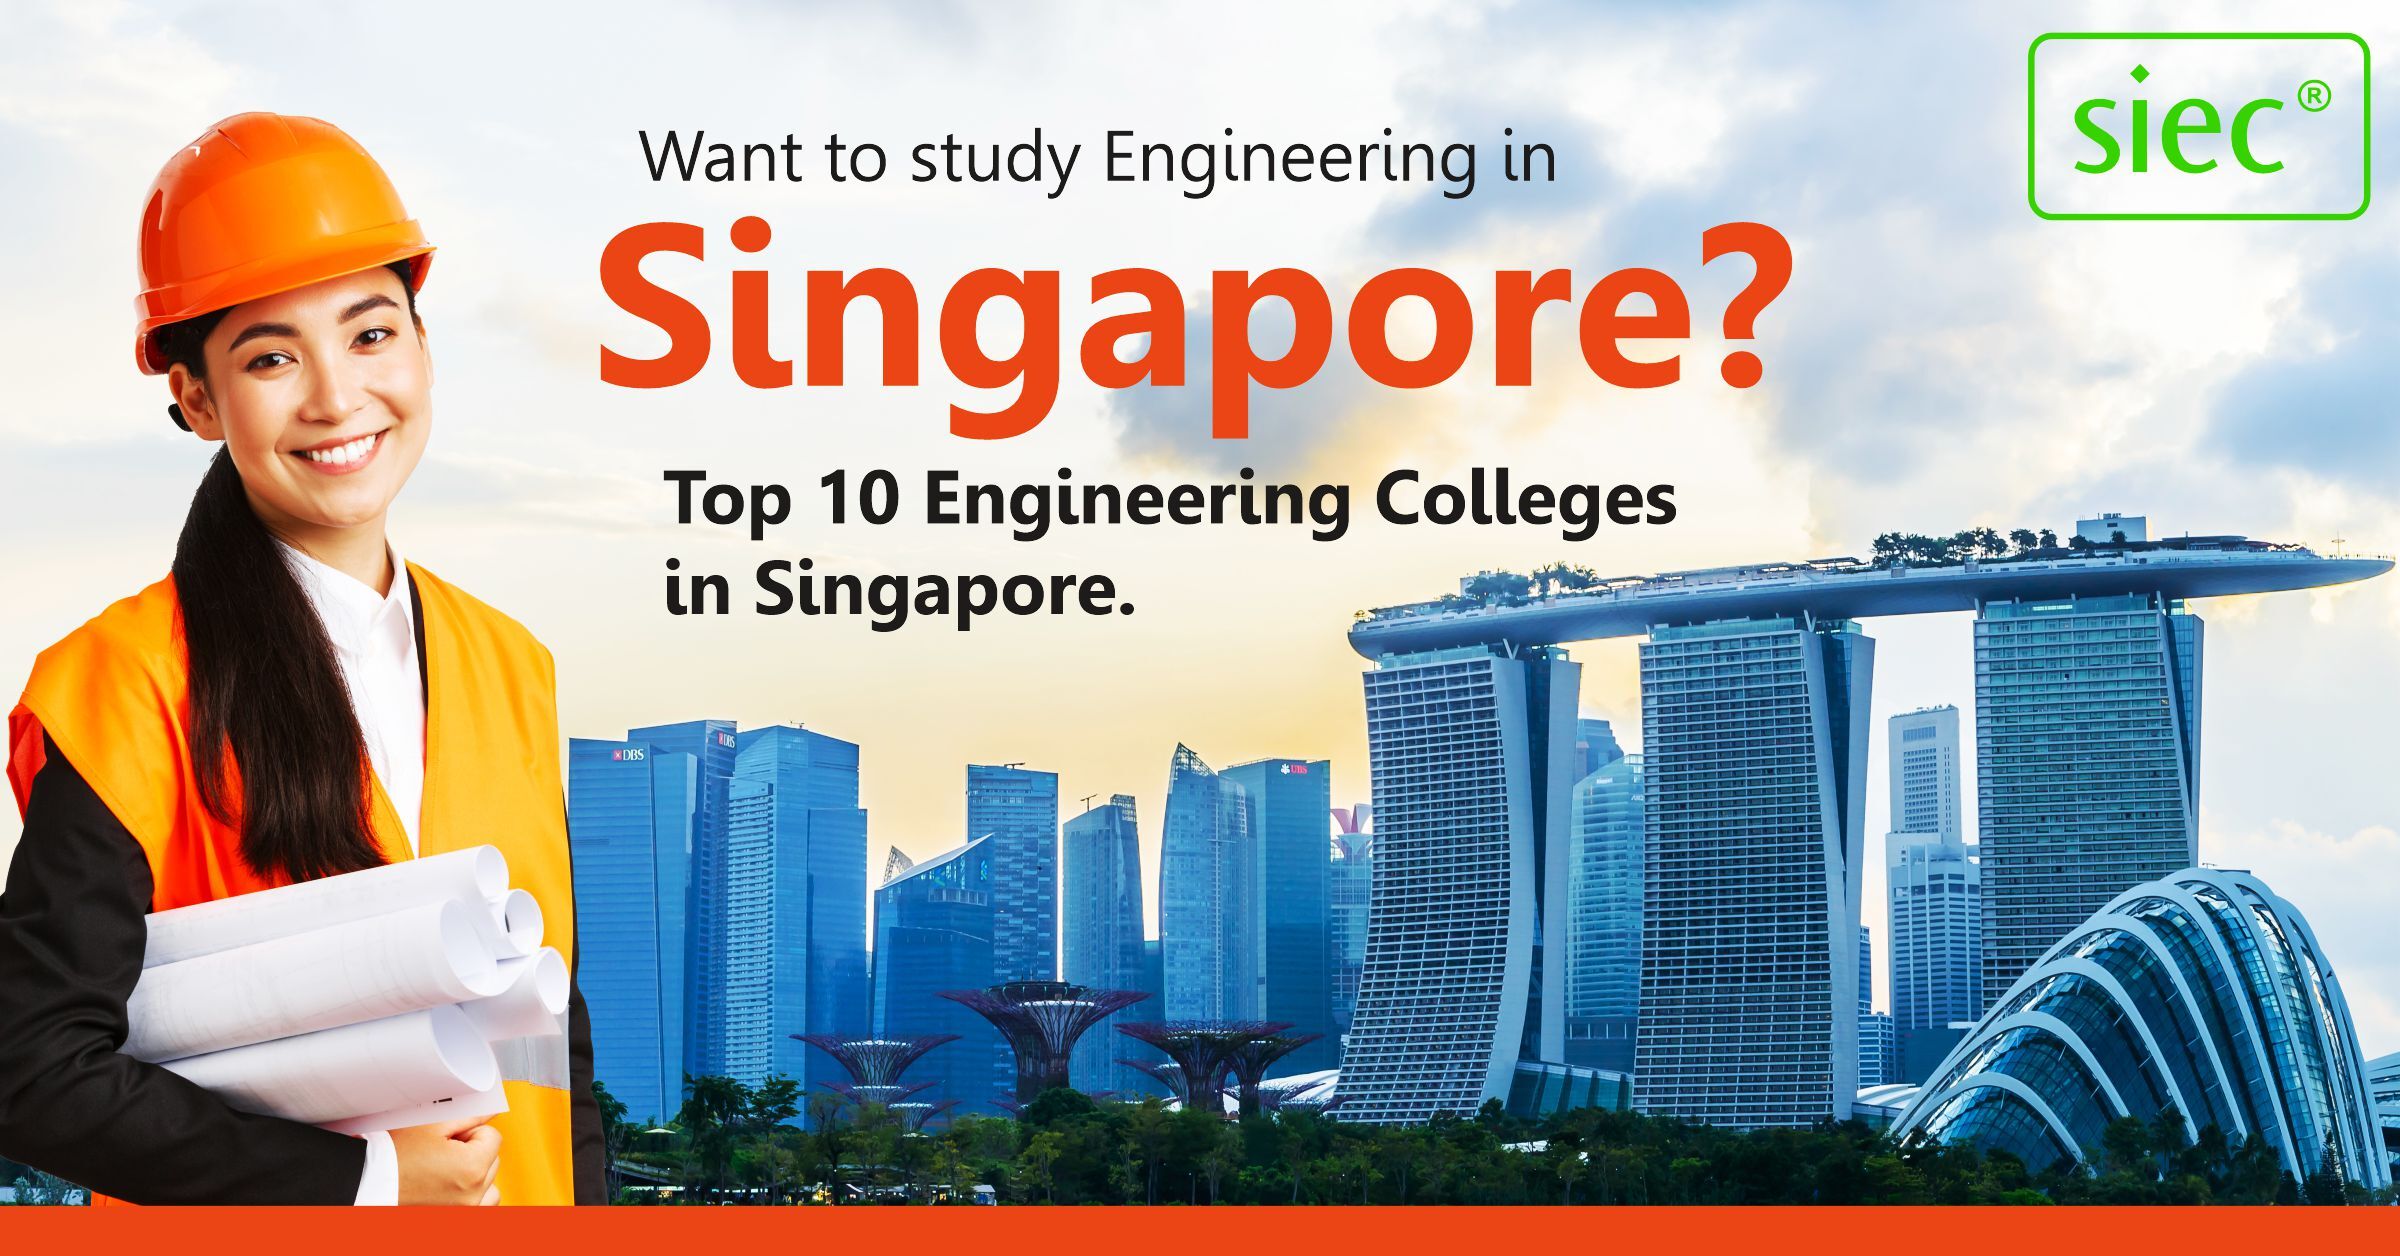 Want to study Engineering in Singapore? Top 10 Engineering Colleges in Singapore